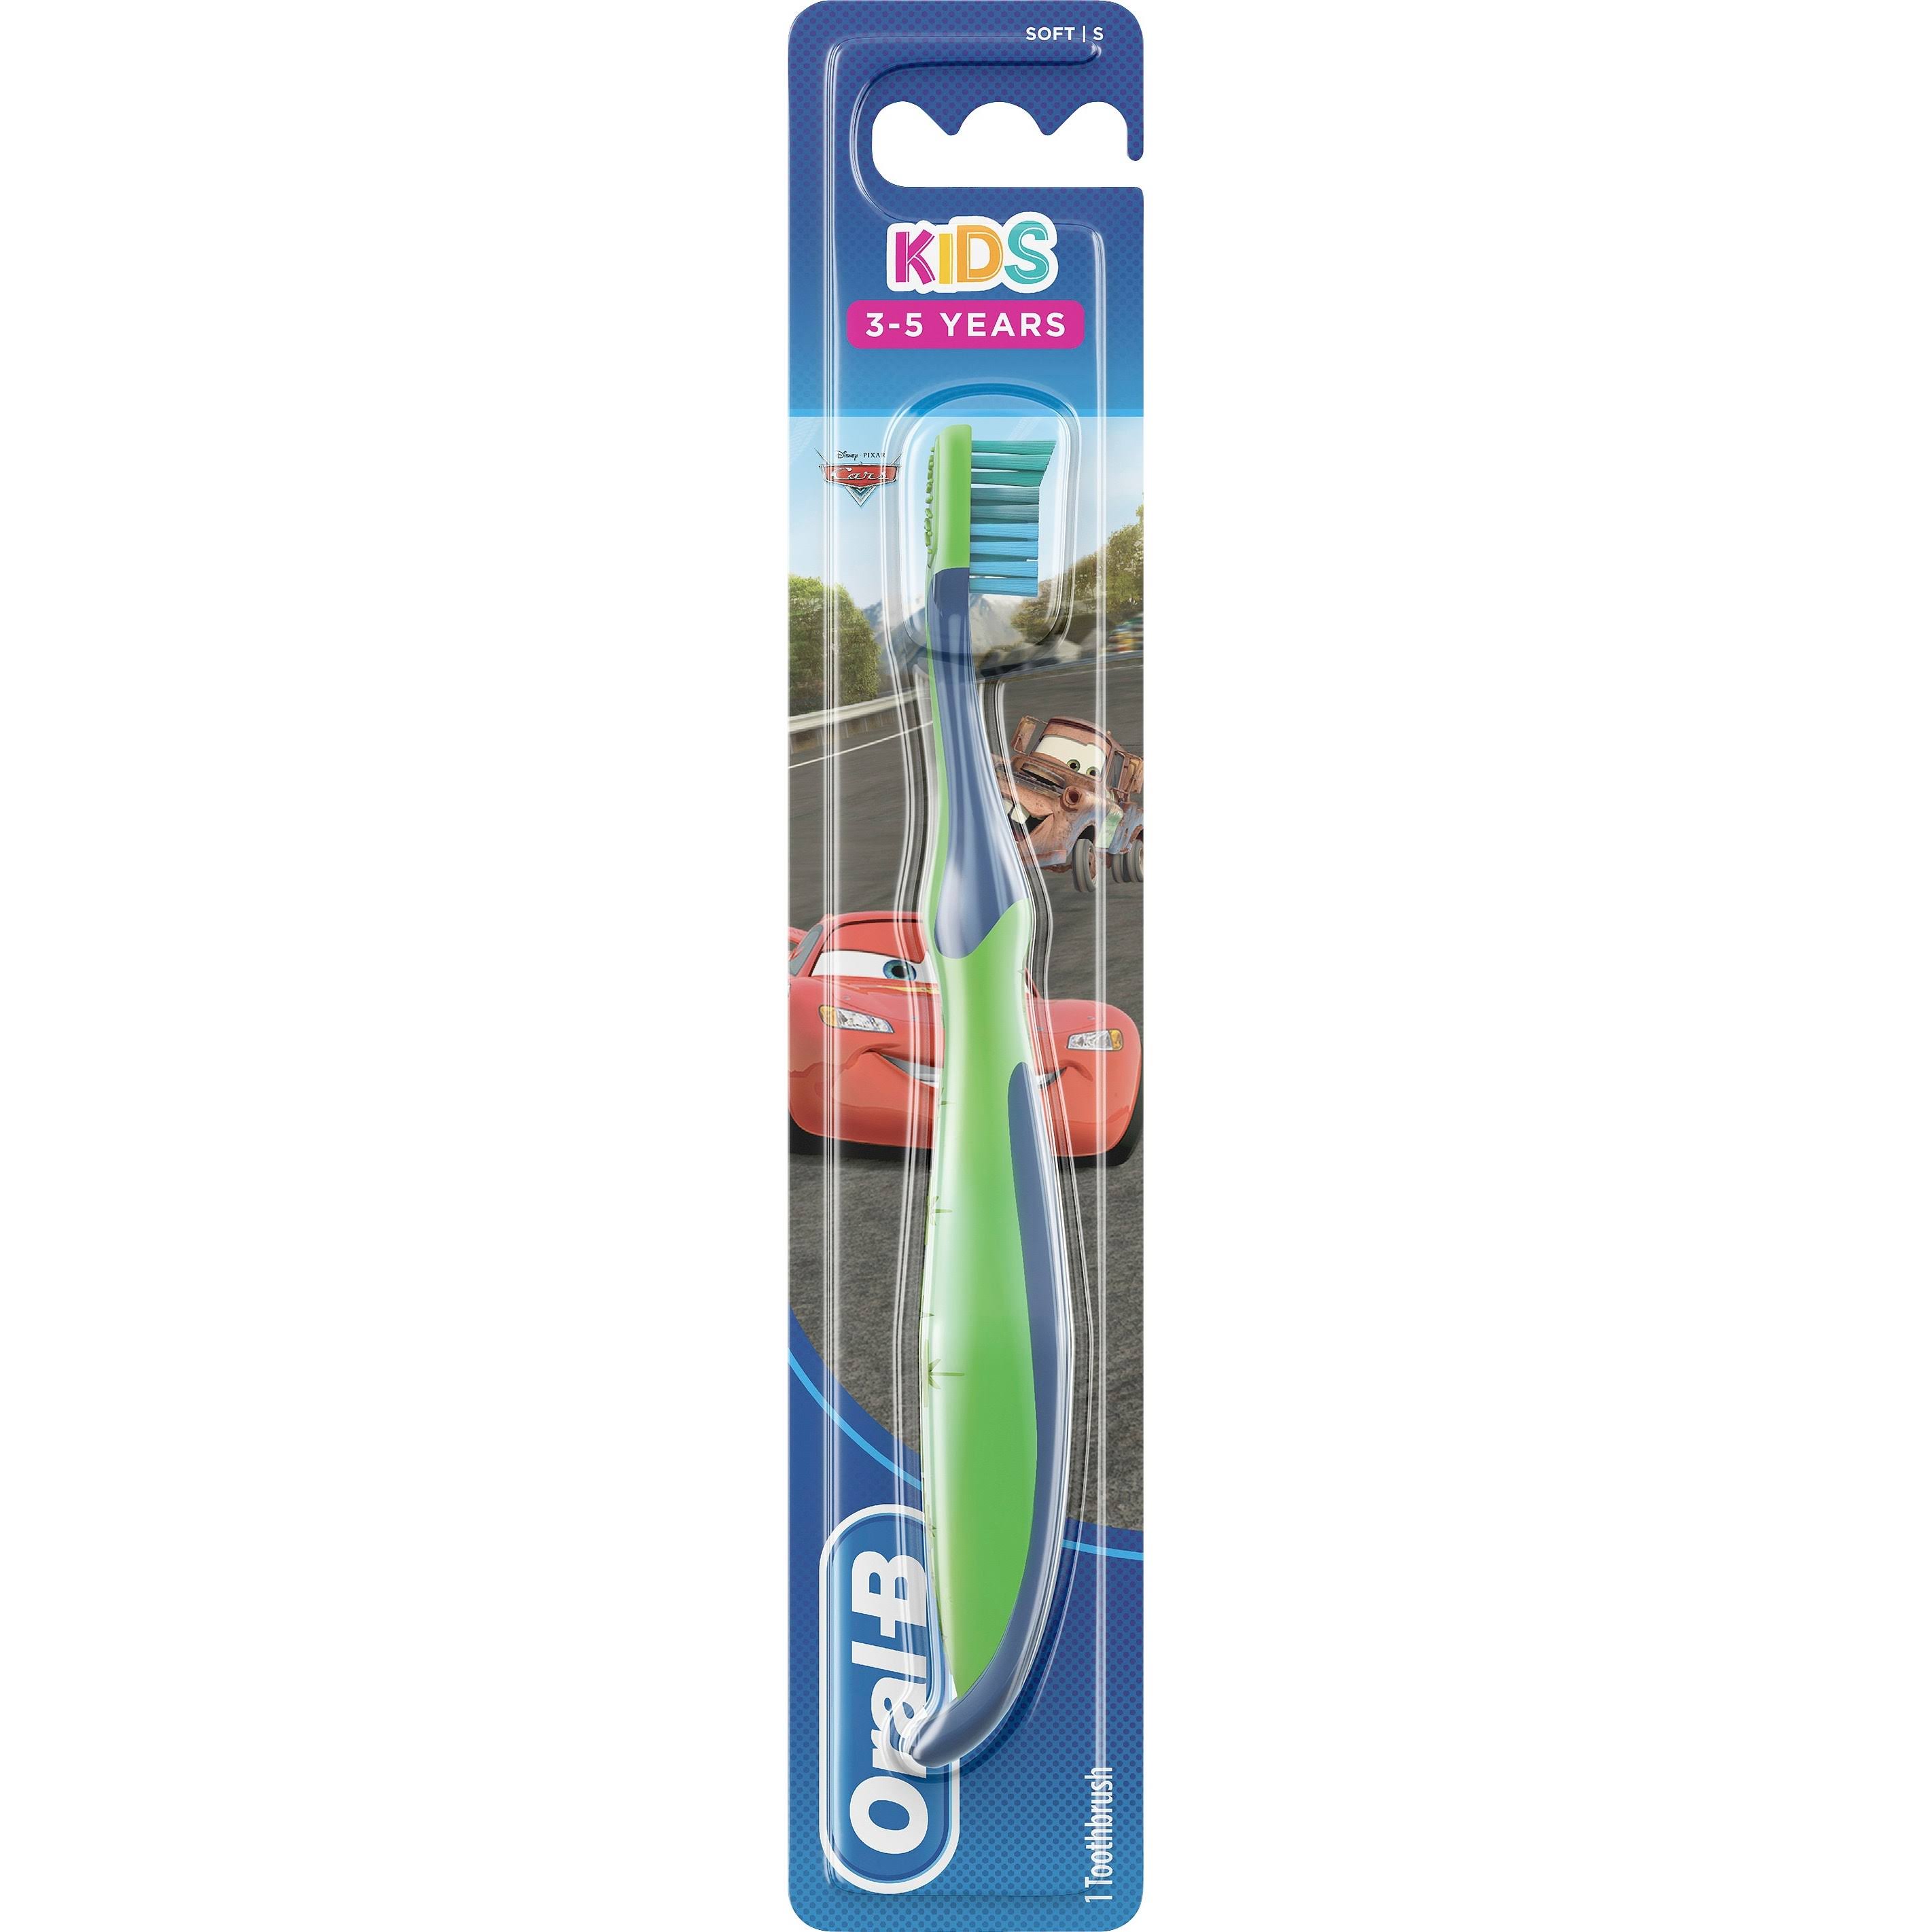 Oral B Kids' Manual Toothbrush - Stages 3 to 5 Years